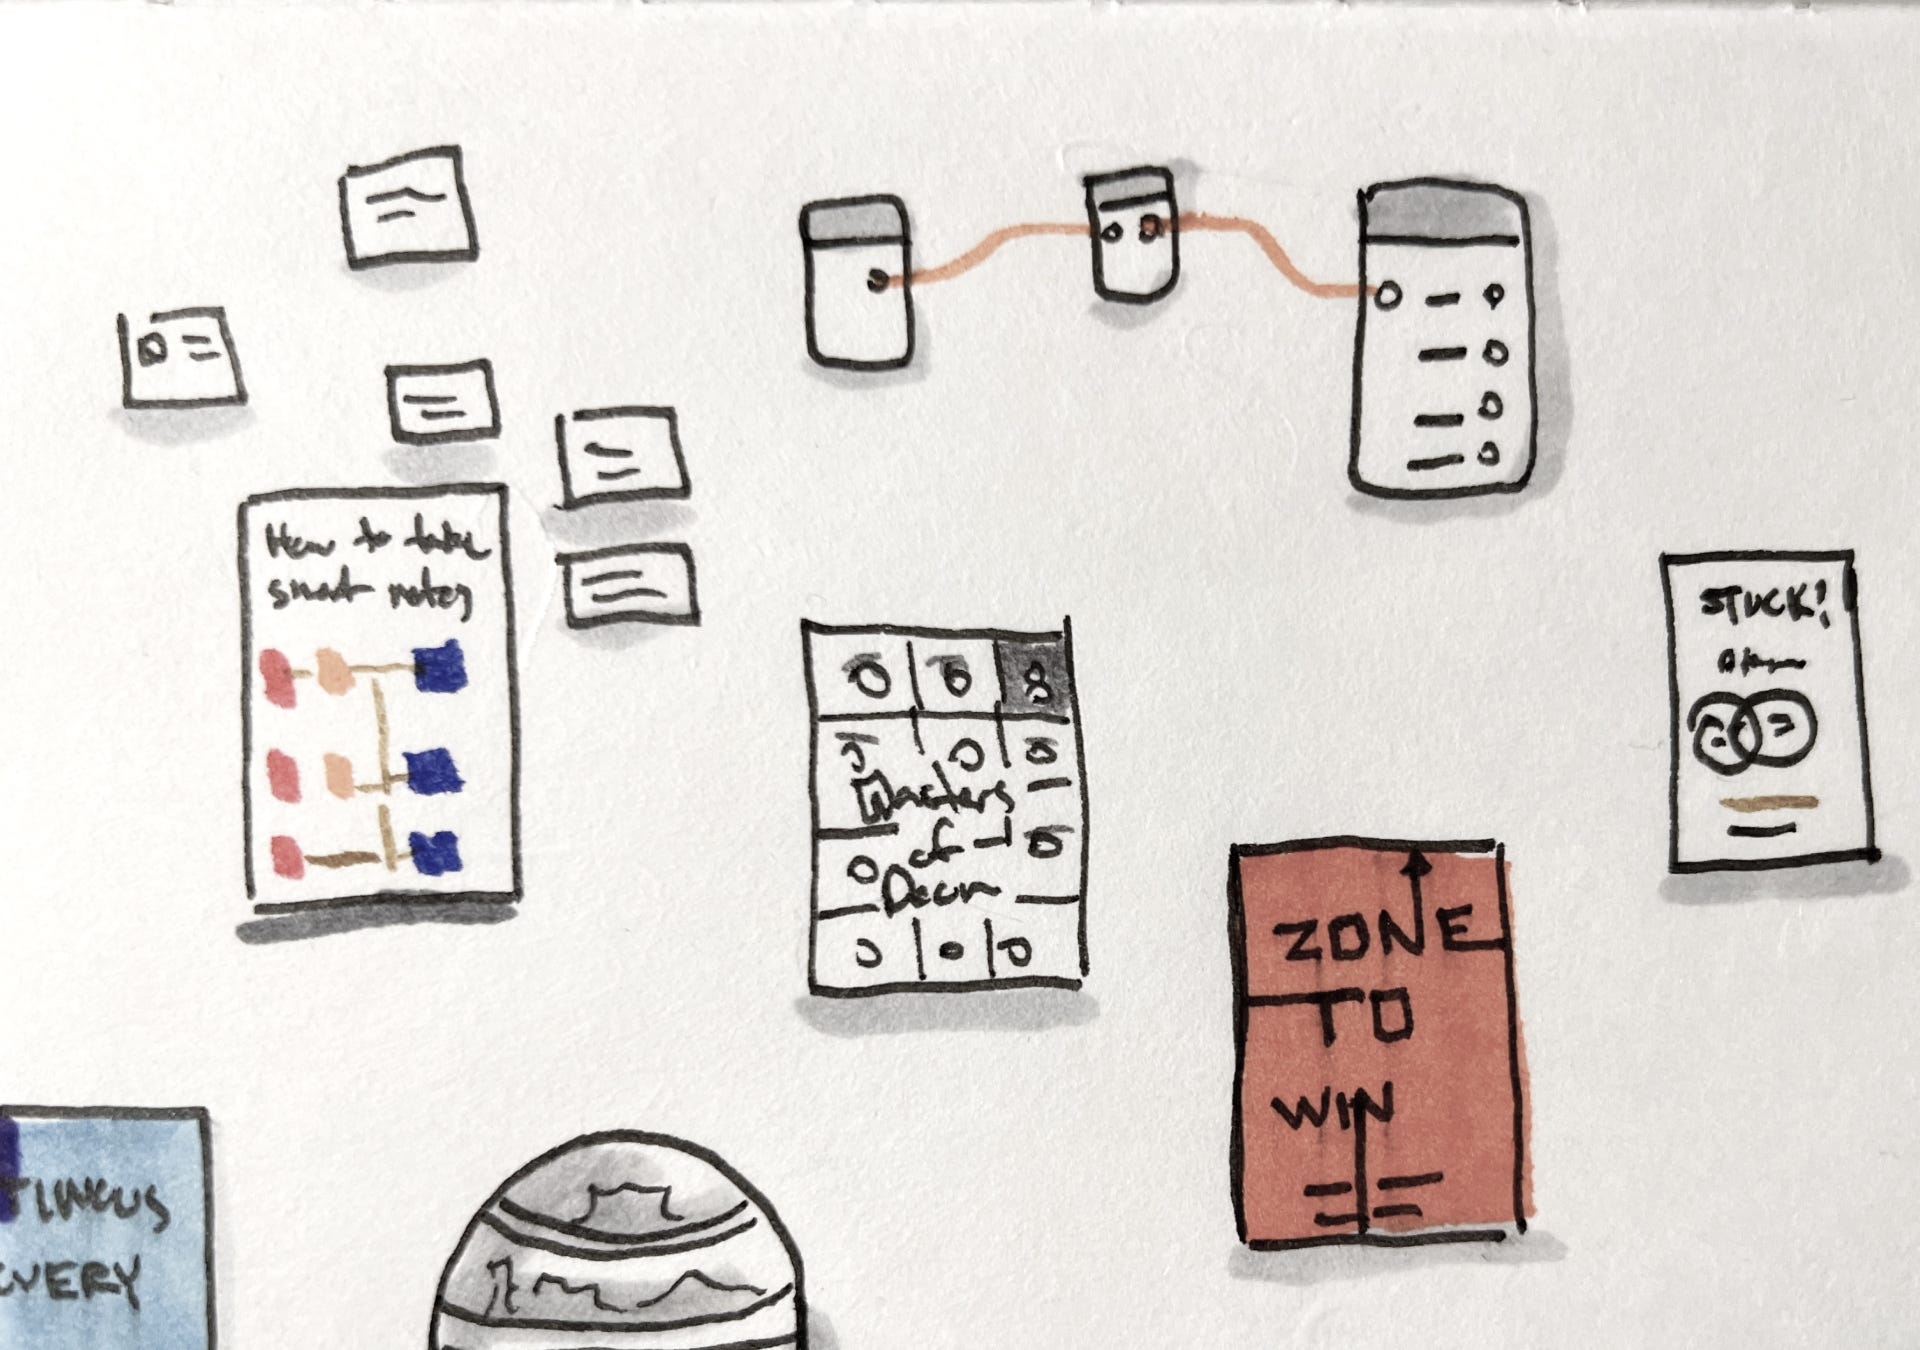 Cover drawing with books and visual programming nodes